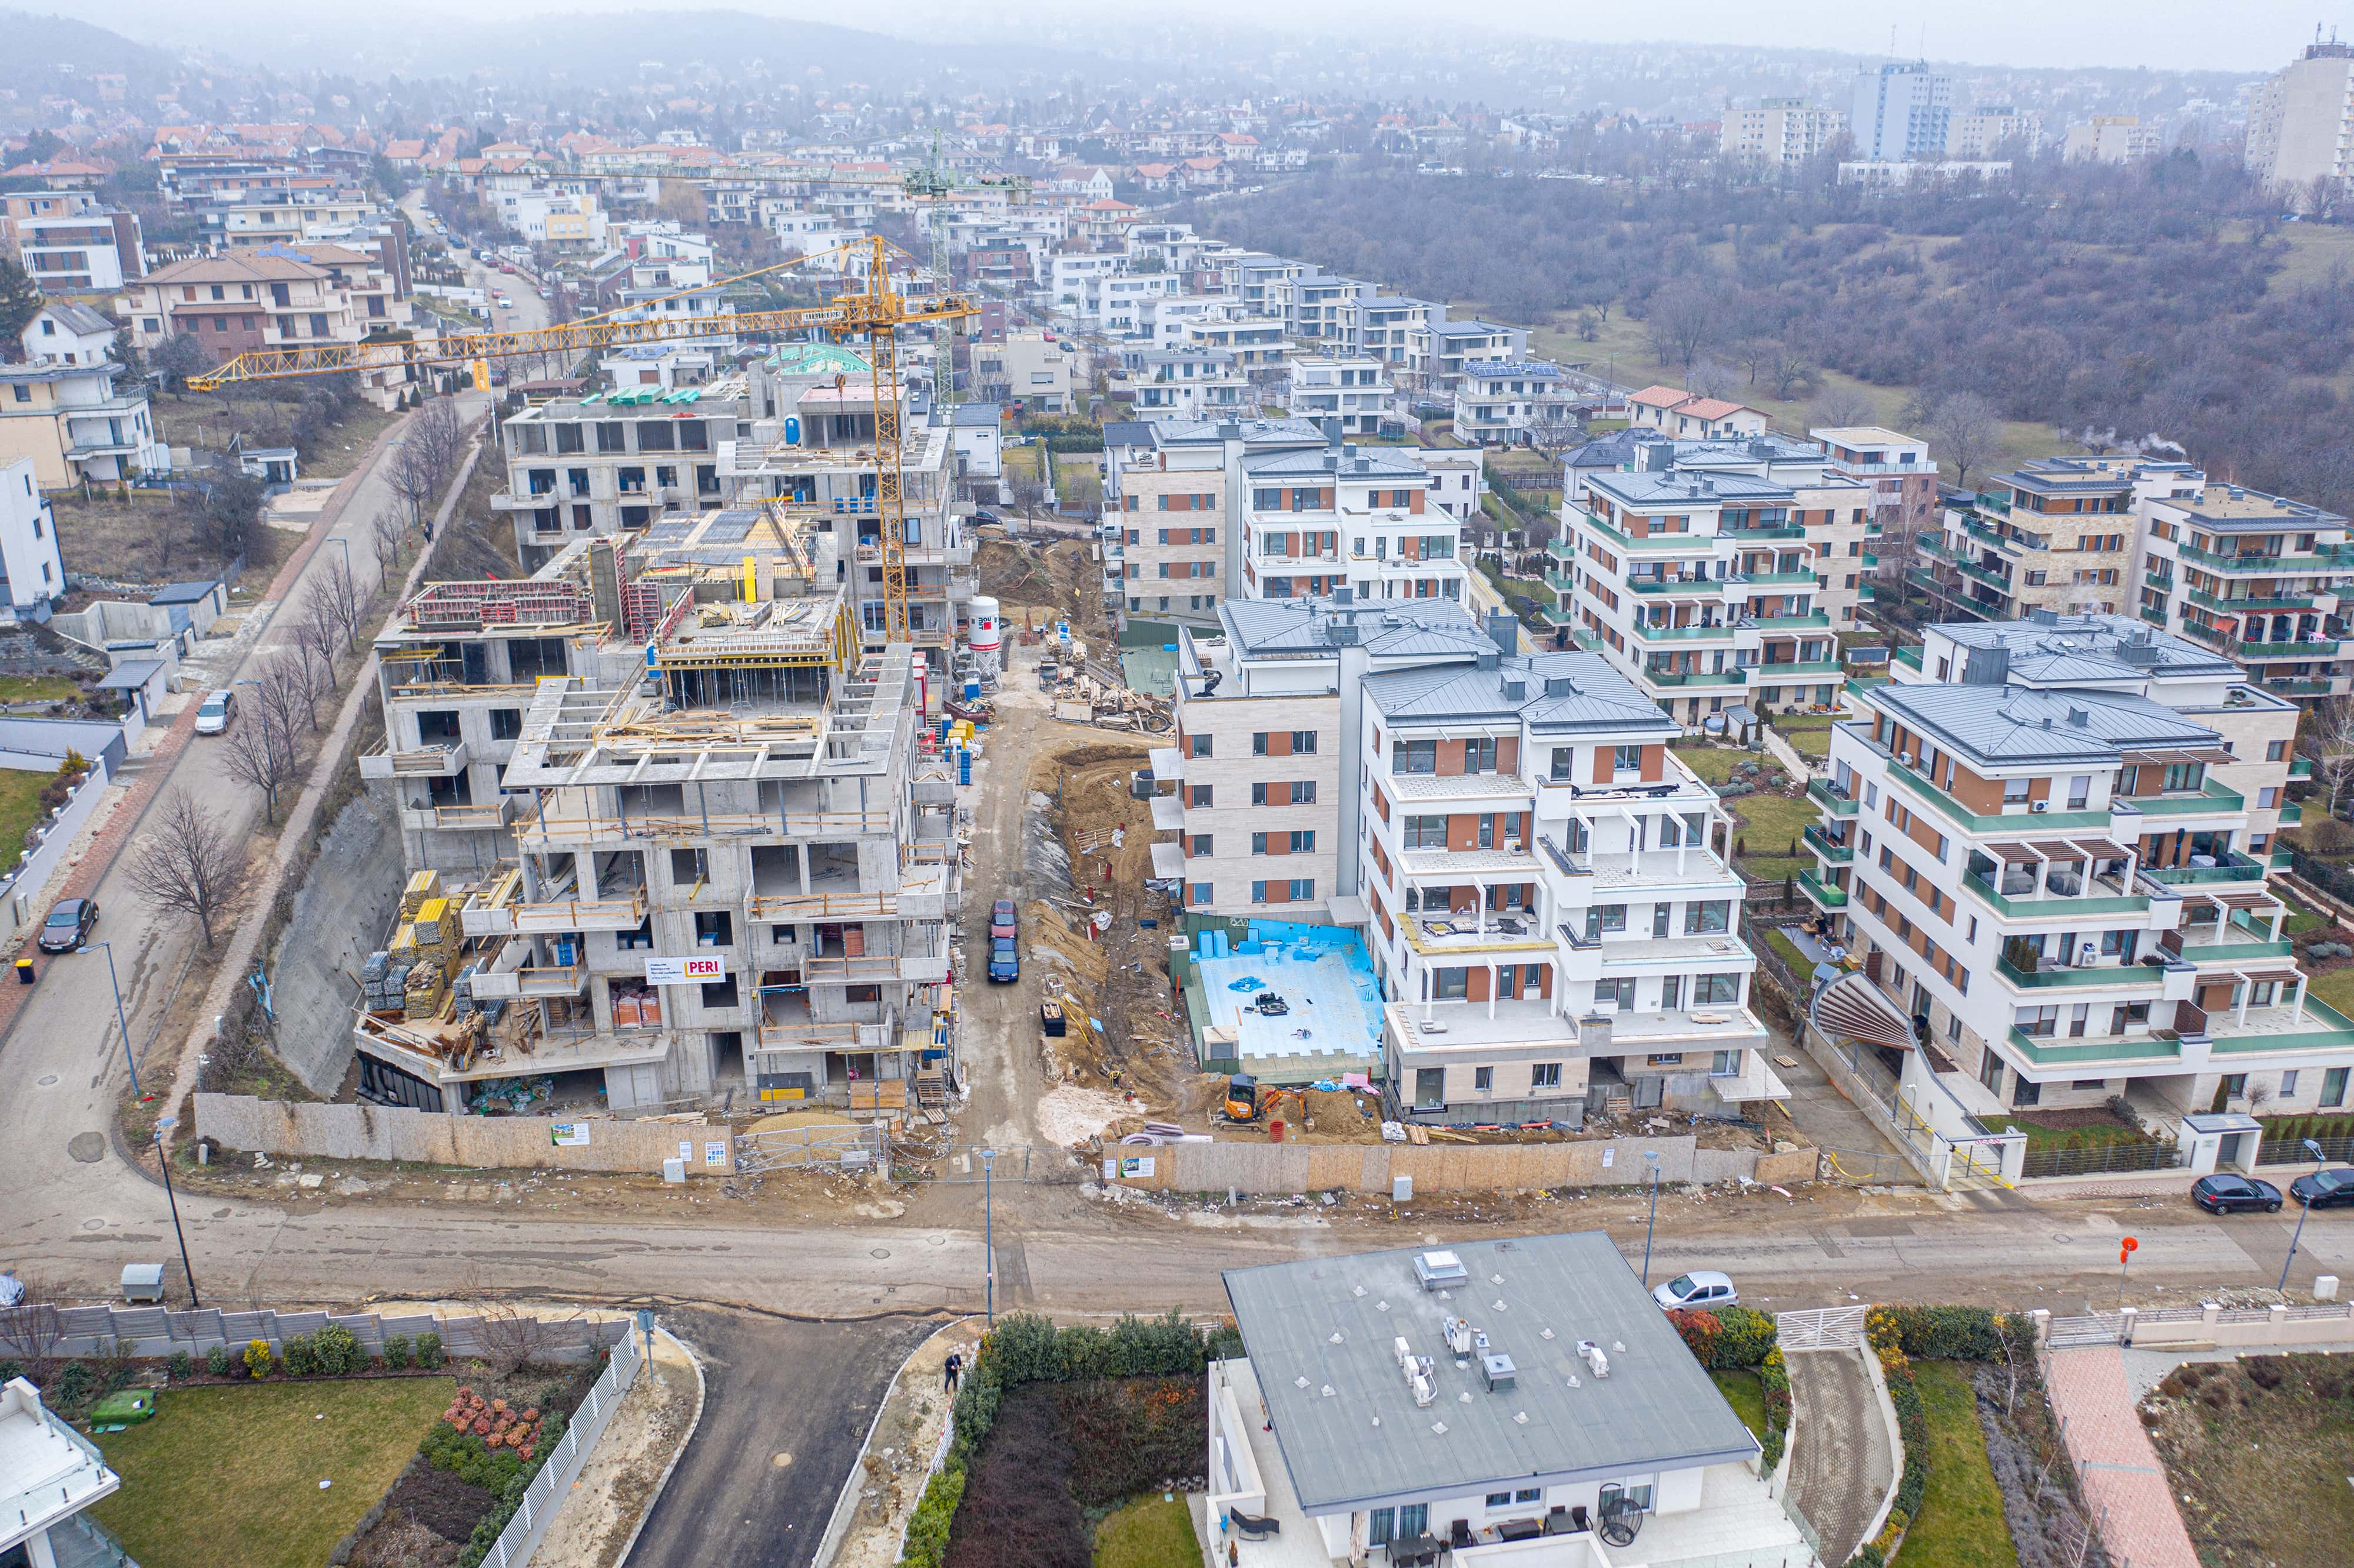 Terrace Residence 4th phase - January 2020